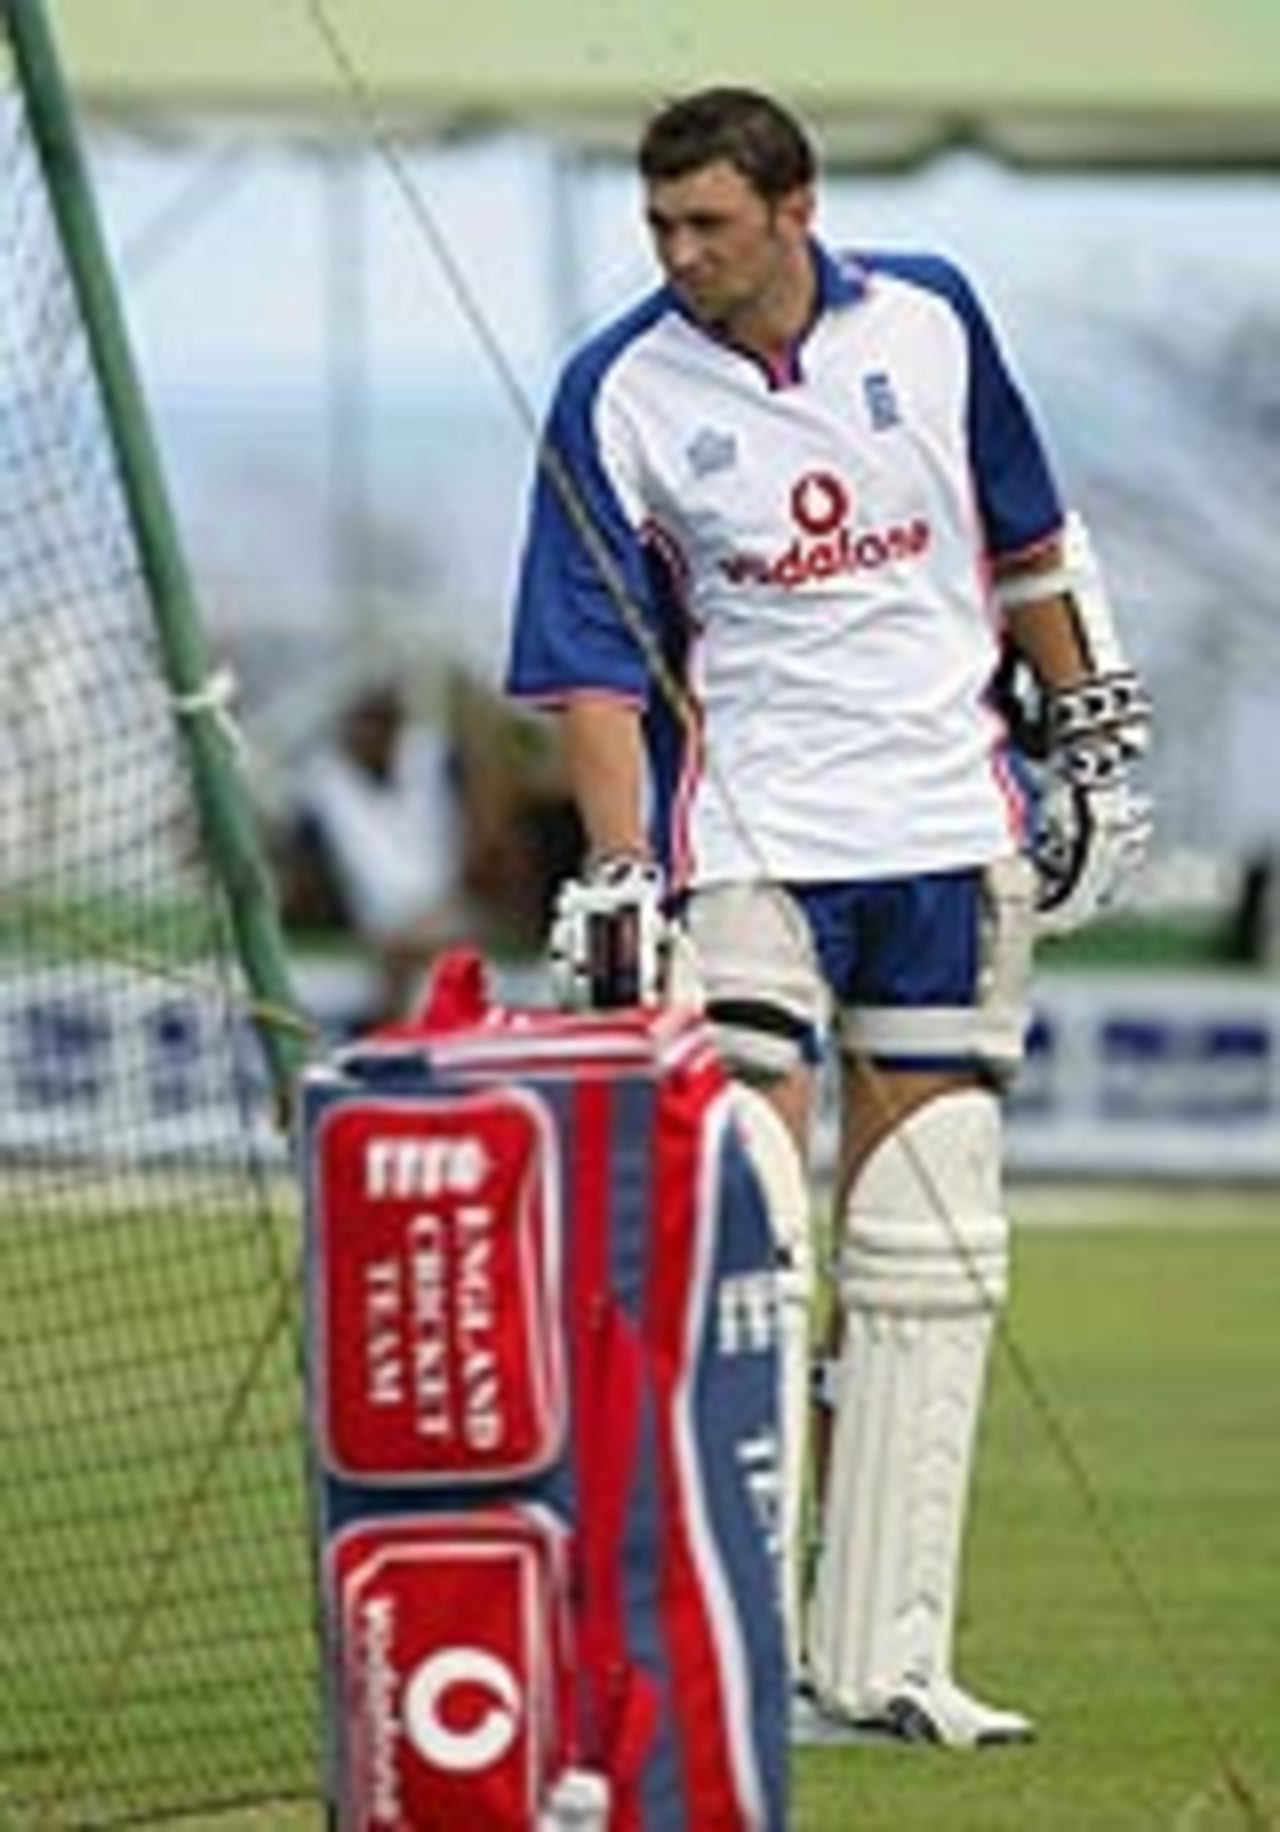 Steve Harmison waits to bat in the nets, England v West Indies, 3rd Test, Barbados